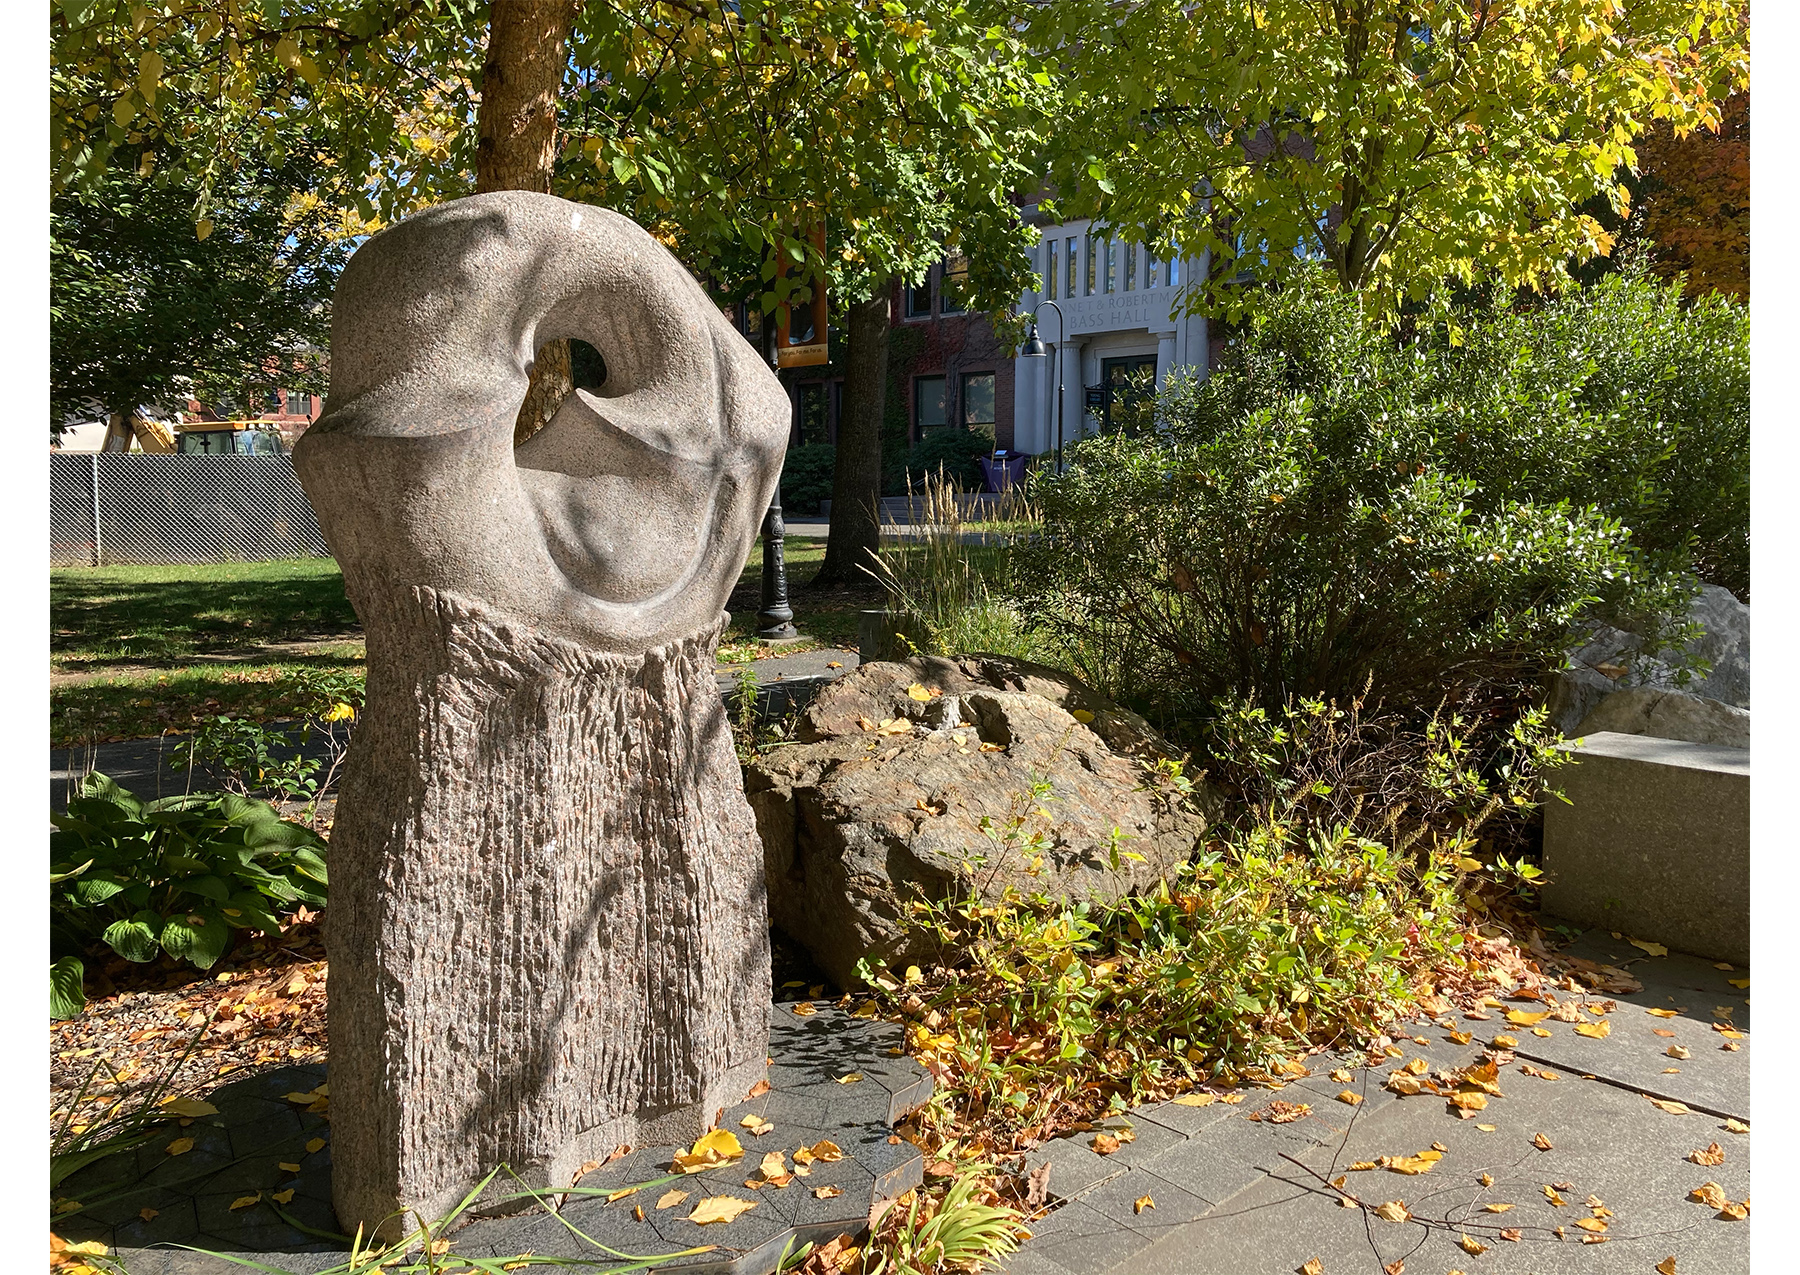 large gray stone sculpture composed of rectangular base and circular top, standing among various leaves and rocks